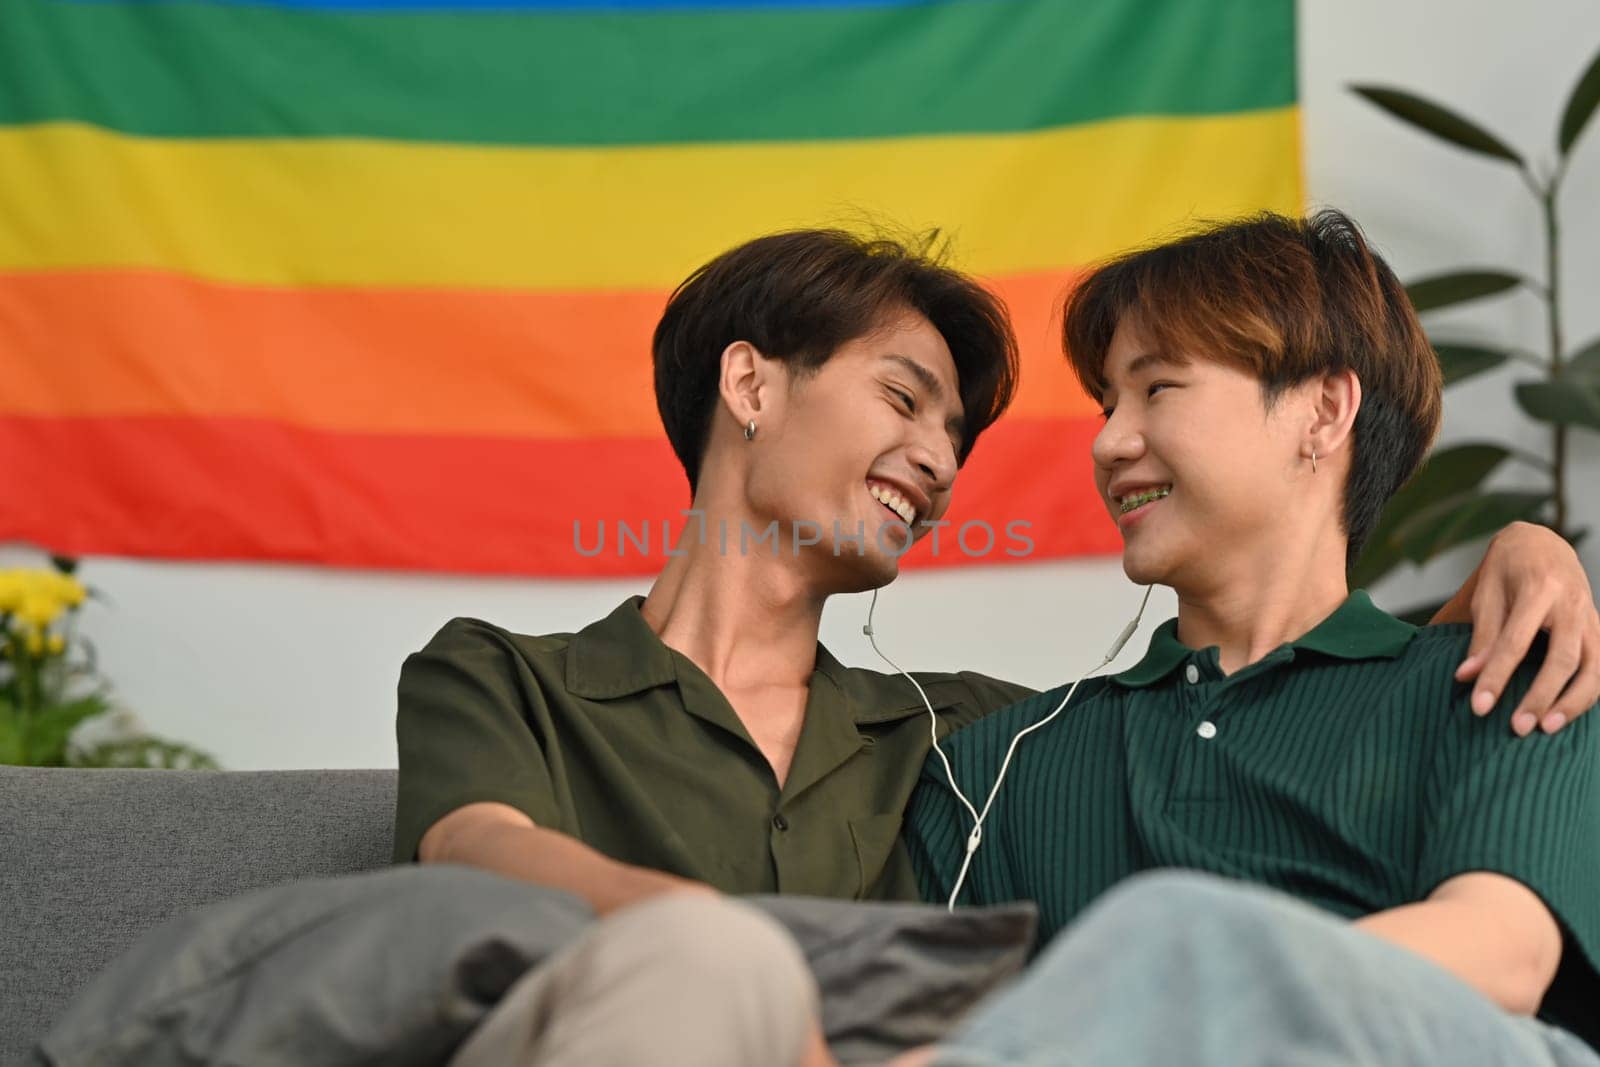 Carefree male gay couple listening to music on earphones, spending time together at home. LGBT, relationship and comfort living concept.